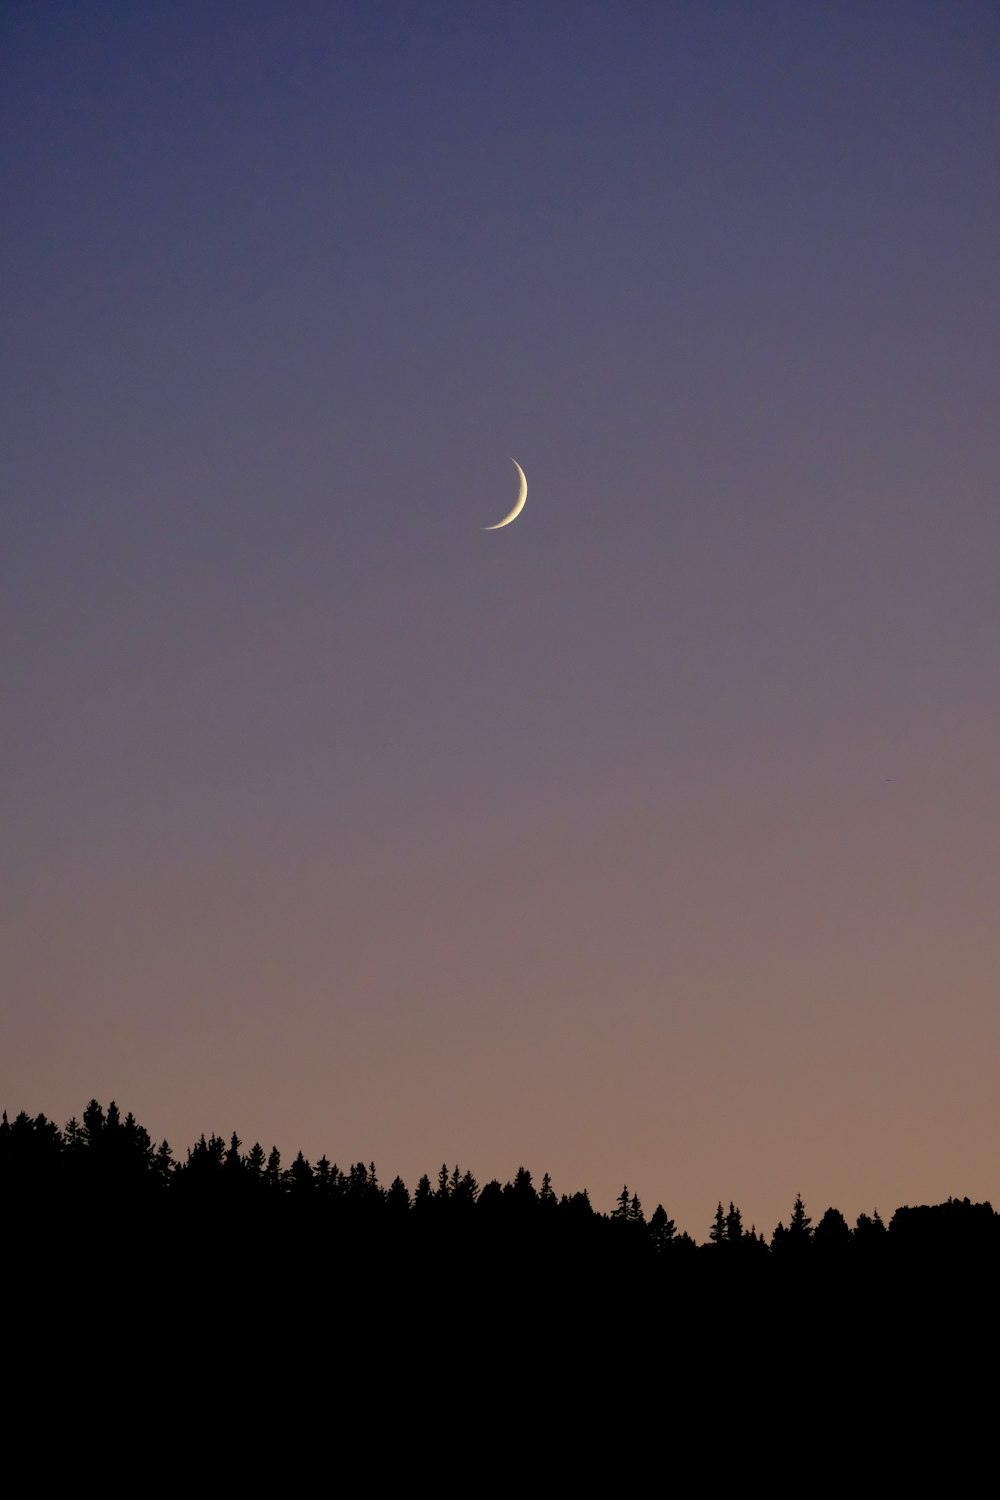 a crescent is seen in the sky over a forest